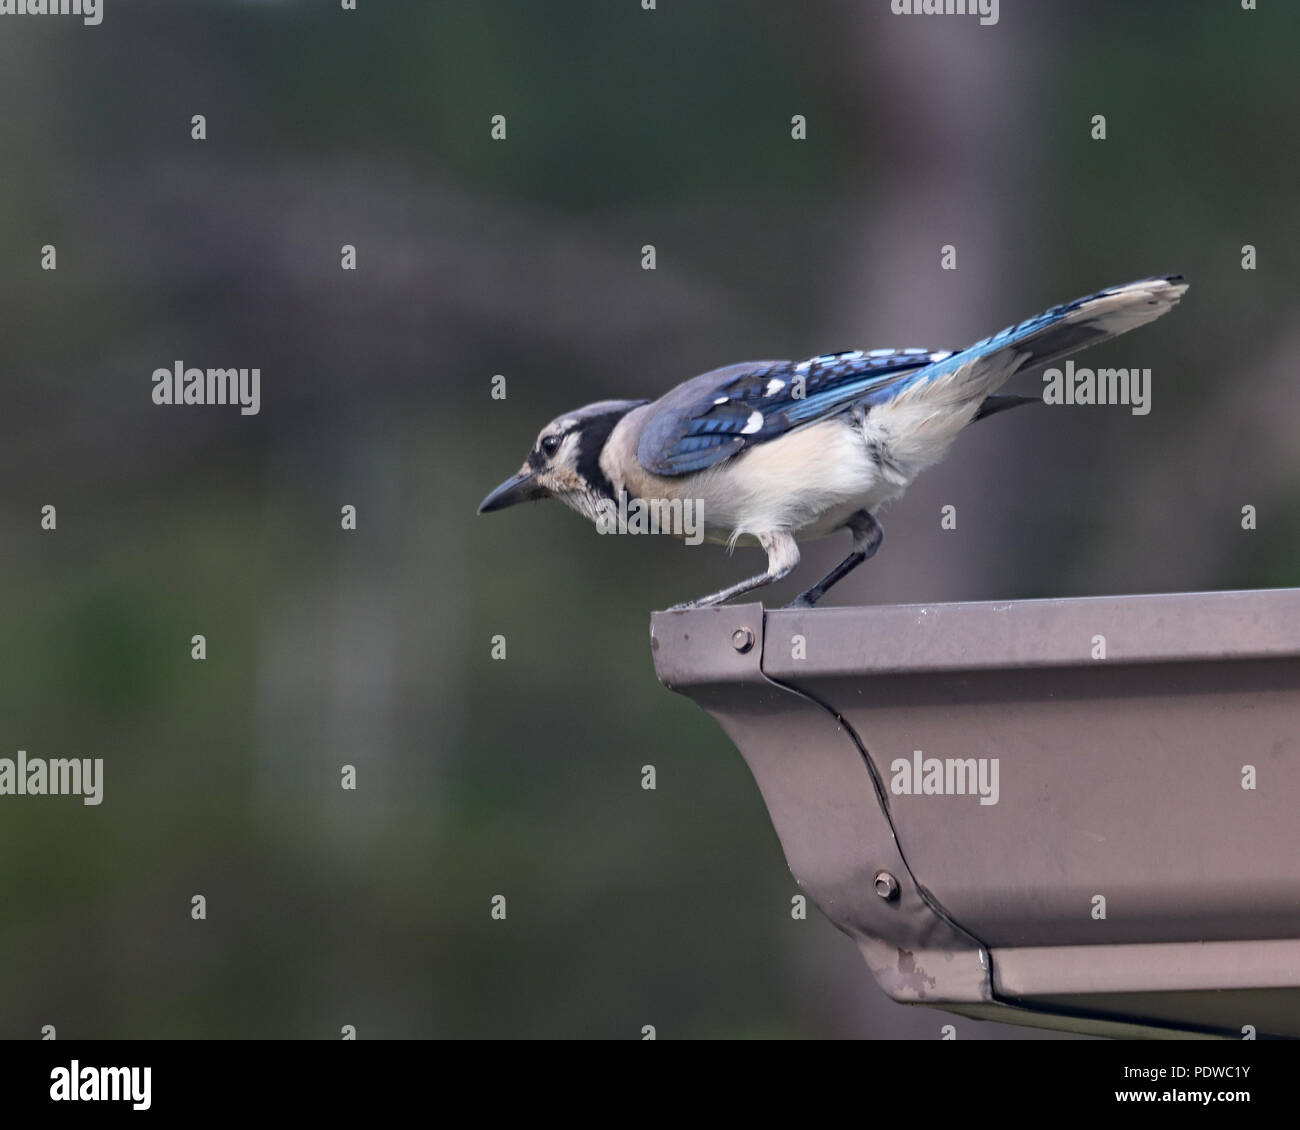 Blue jay looking down from a perch on a gutter Stock Photo